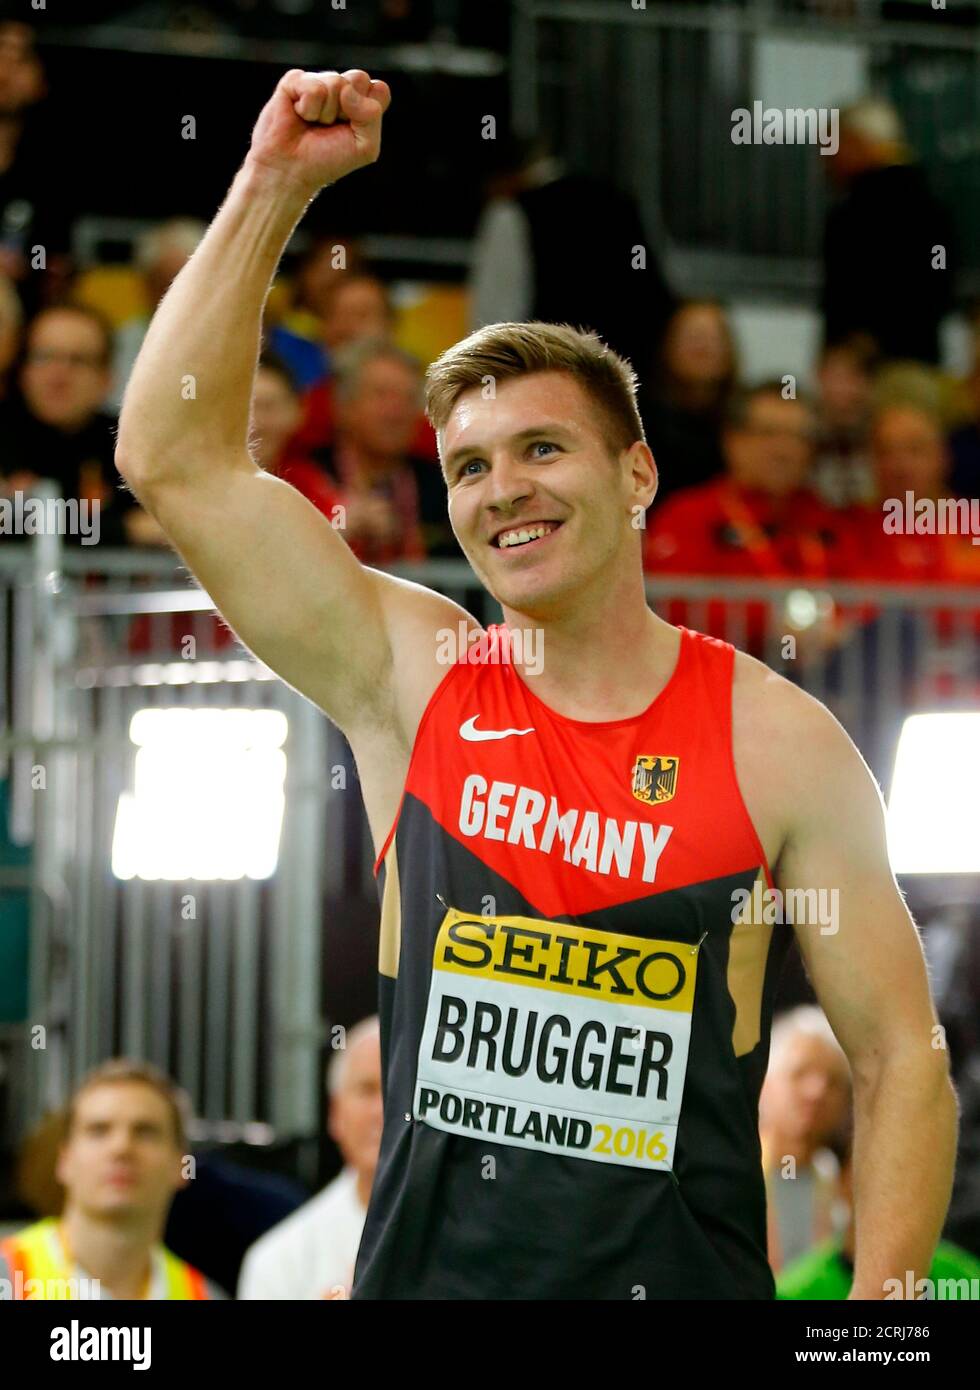 Mathias Brugger of Germany celebrates winning the bronze medal in the men's heptathlon during the IAAF World Indoor Athletics Championships in Portland, Oregon March 19, 2016. REUTERS/Mike Blake Stock Photo